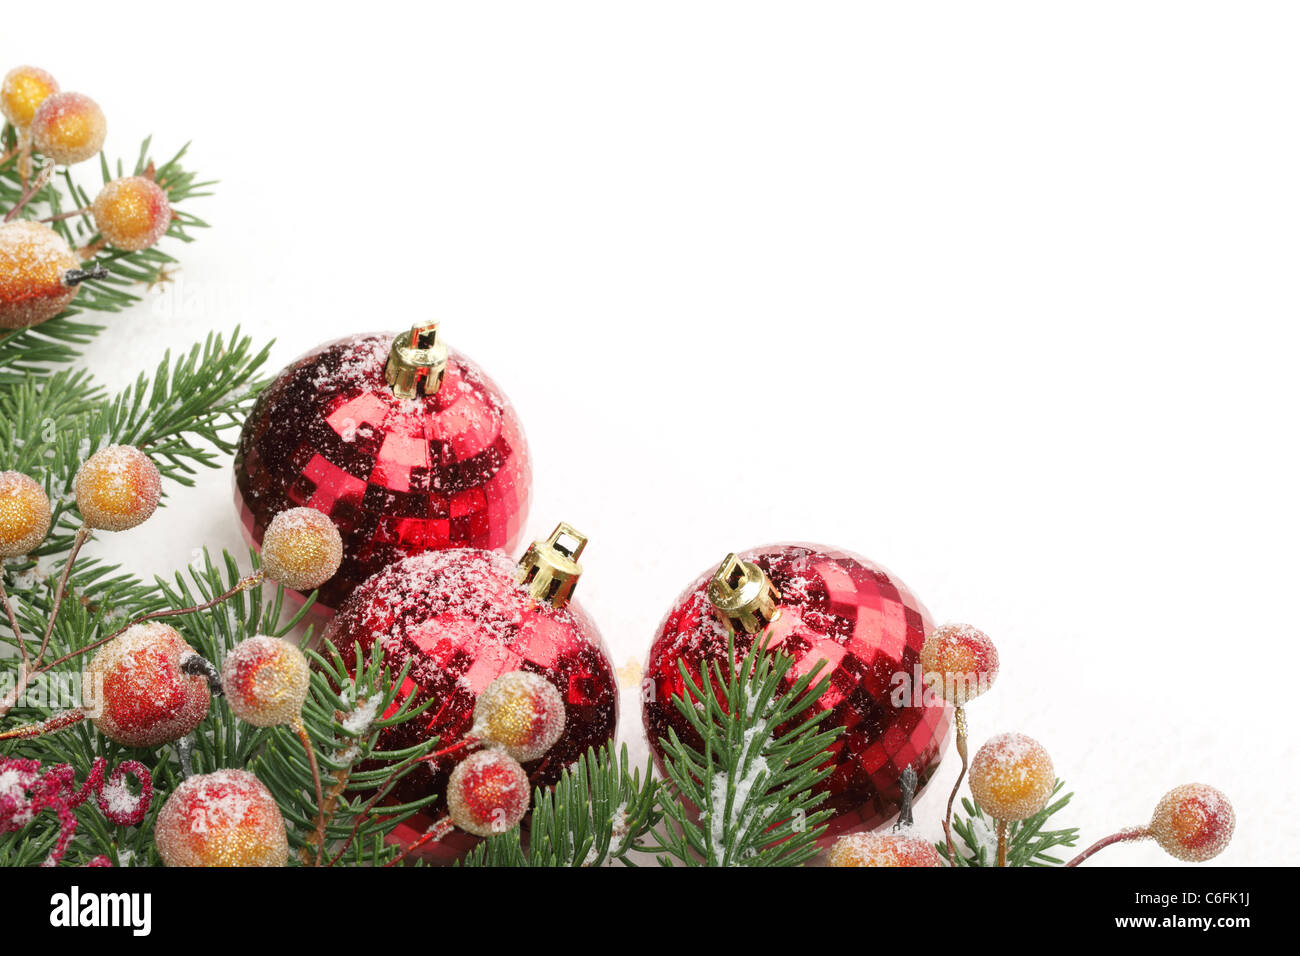 Pine branches, berries and balls with snow for Christmas border. Stock Photo